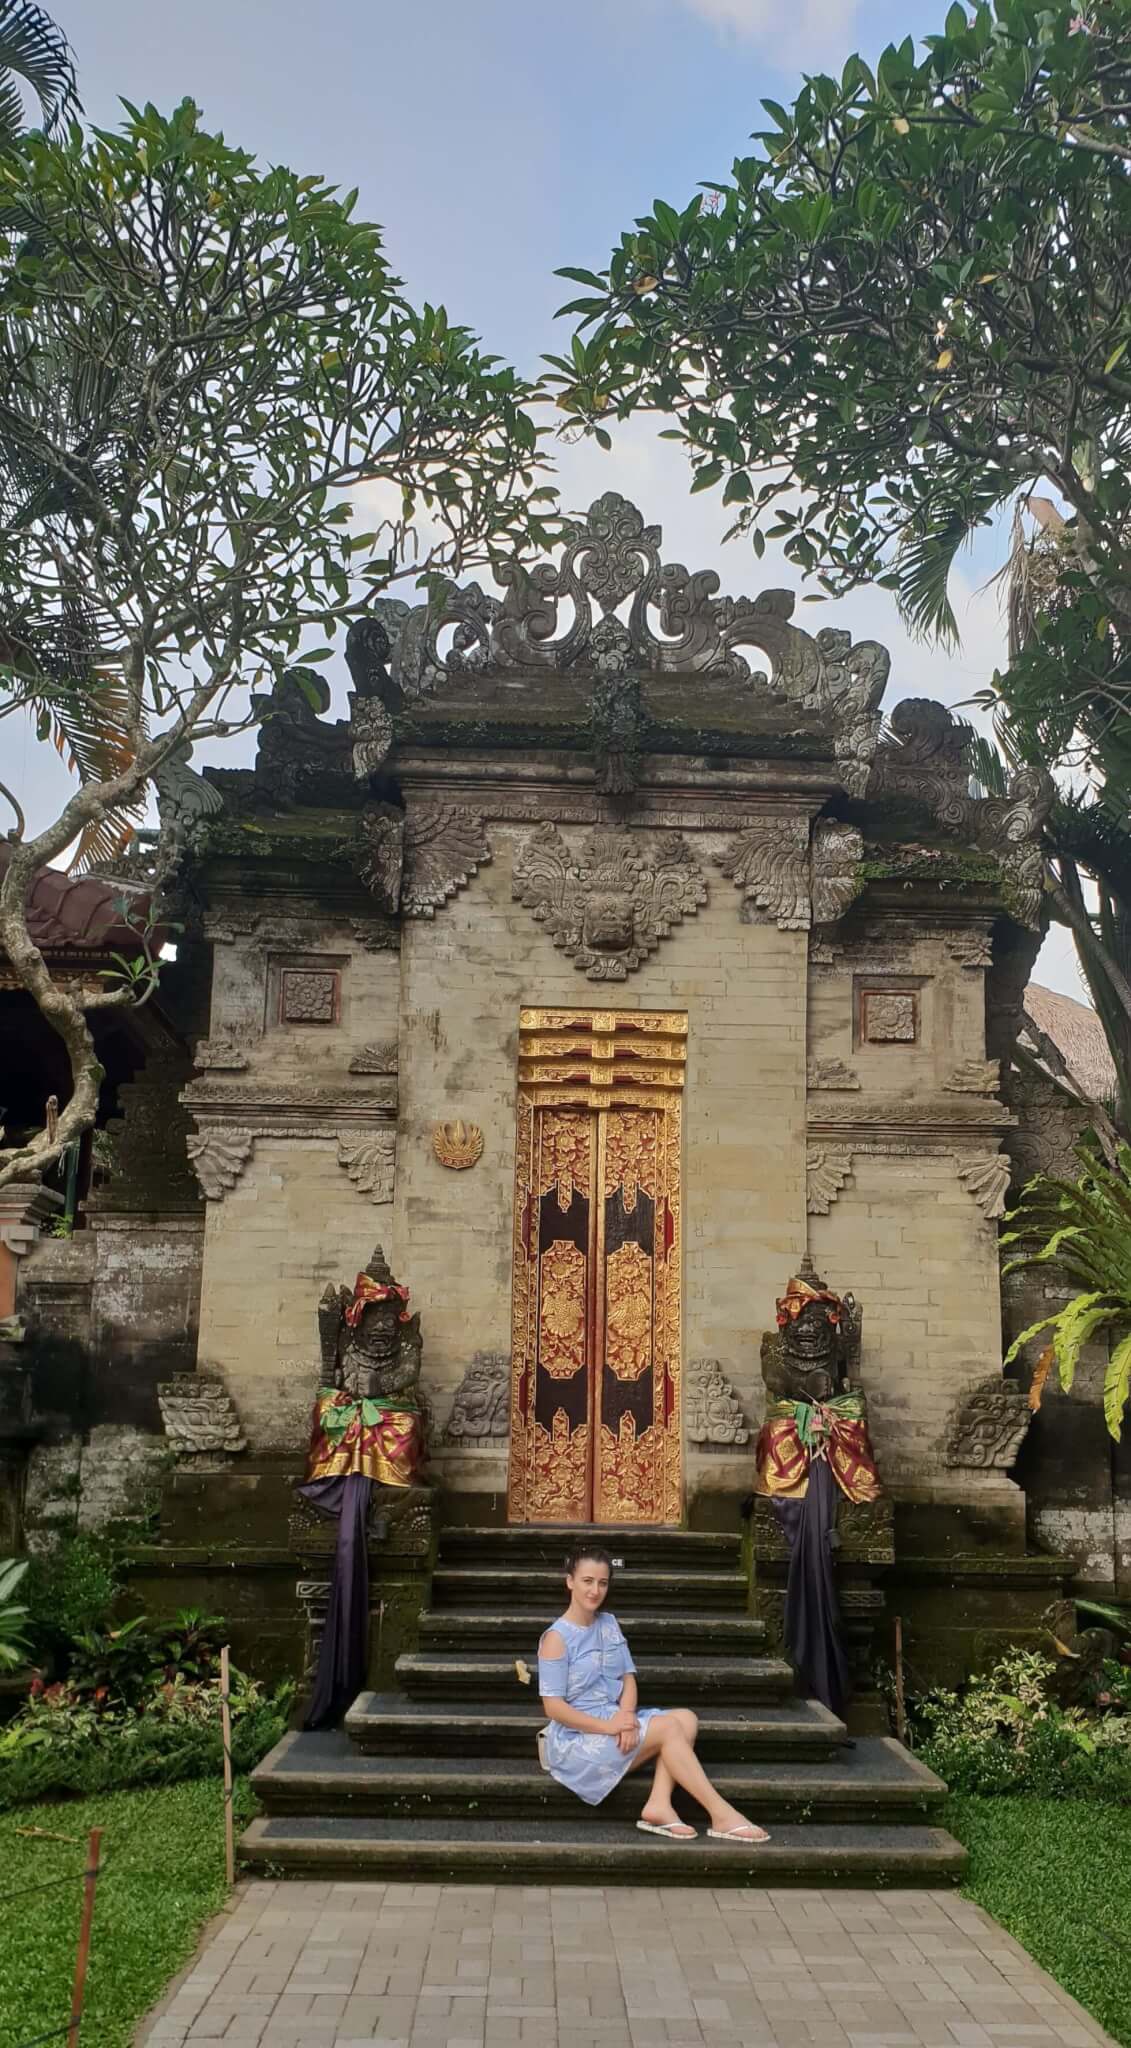 The Ubud Royal Palace is an extremely instagrammable location